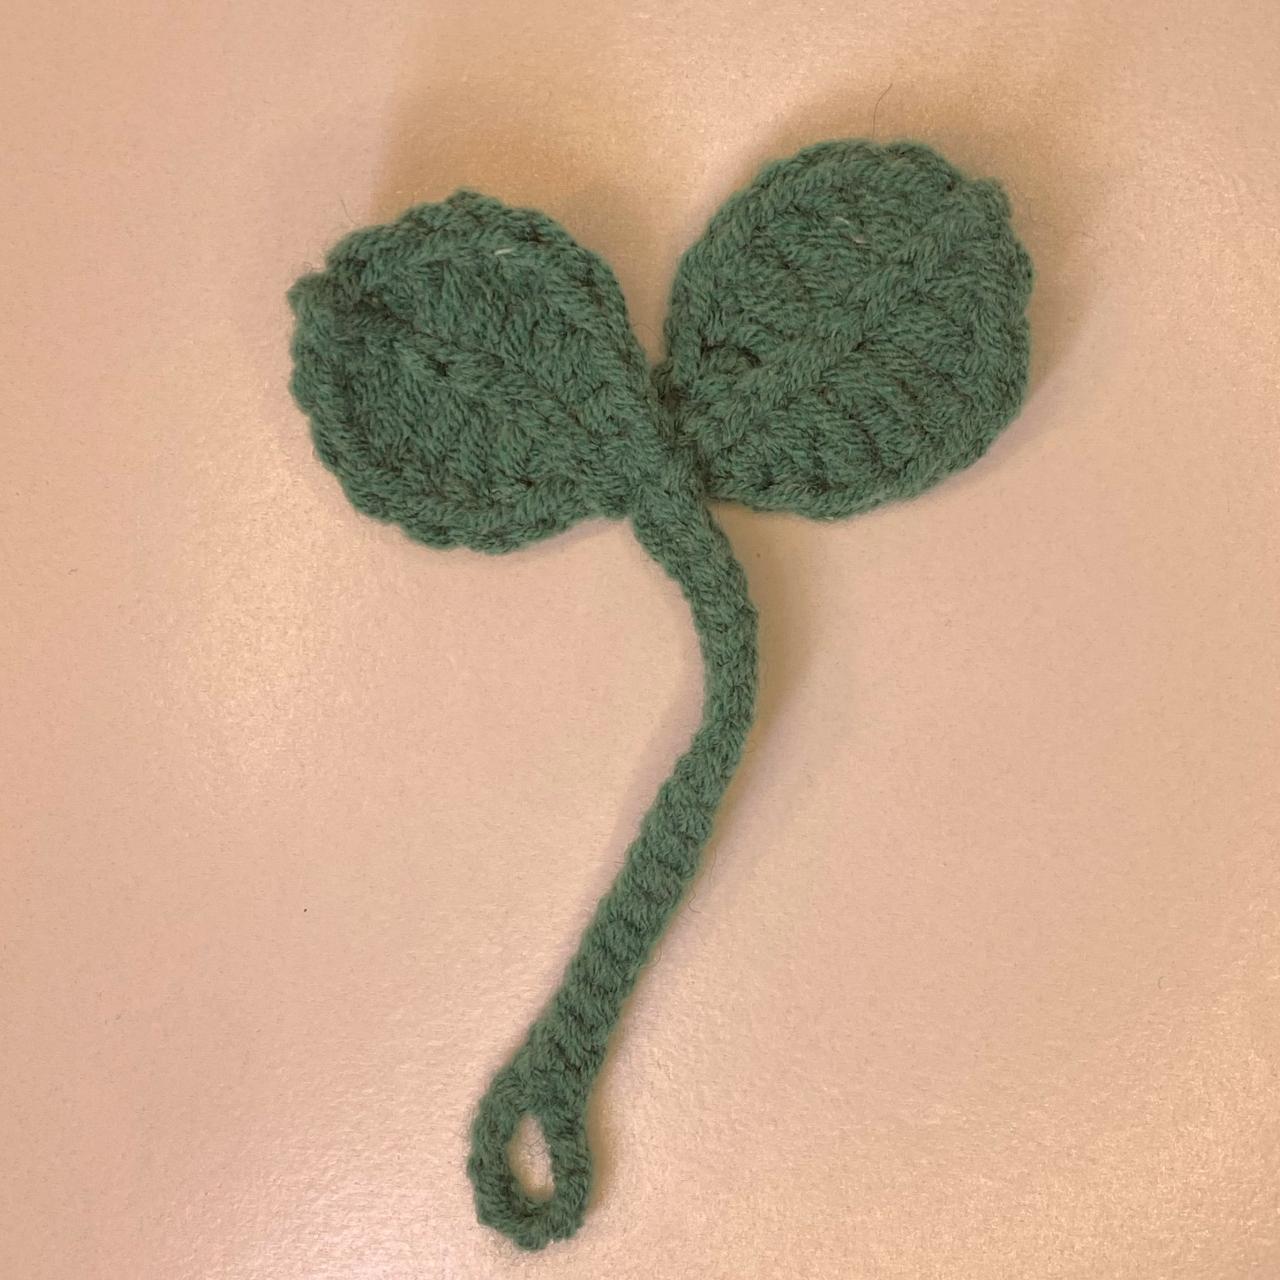 This listing is for the Powerpuff Heart Crochet - Depop